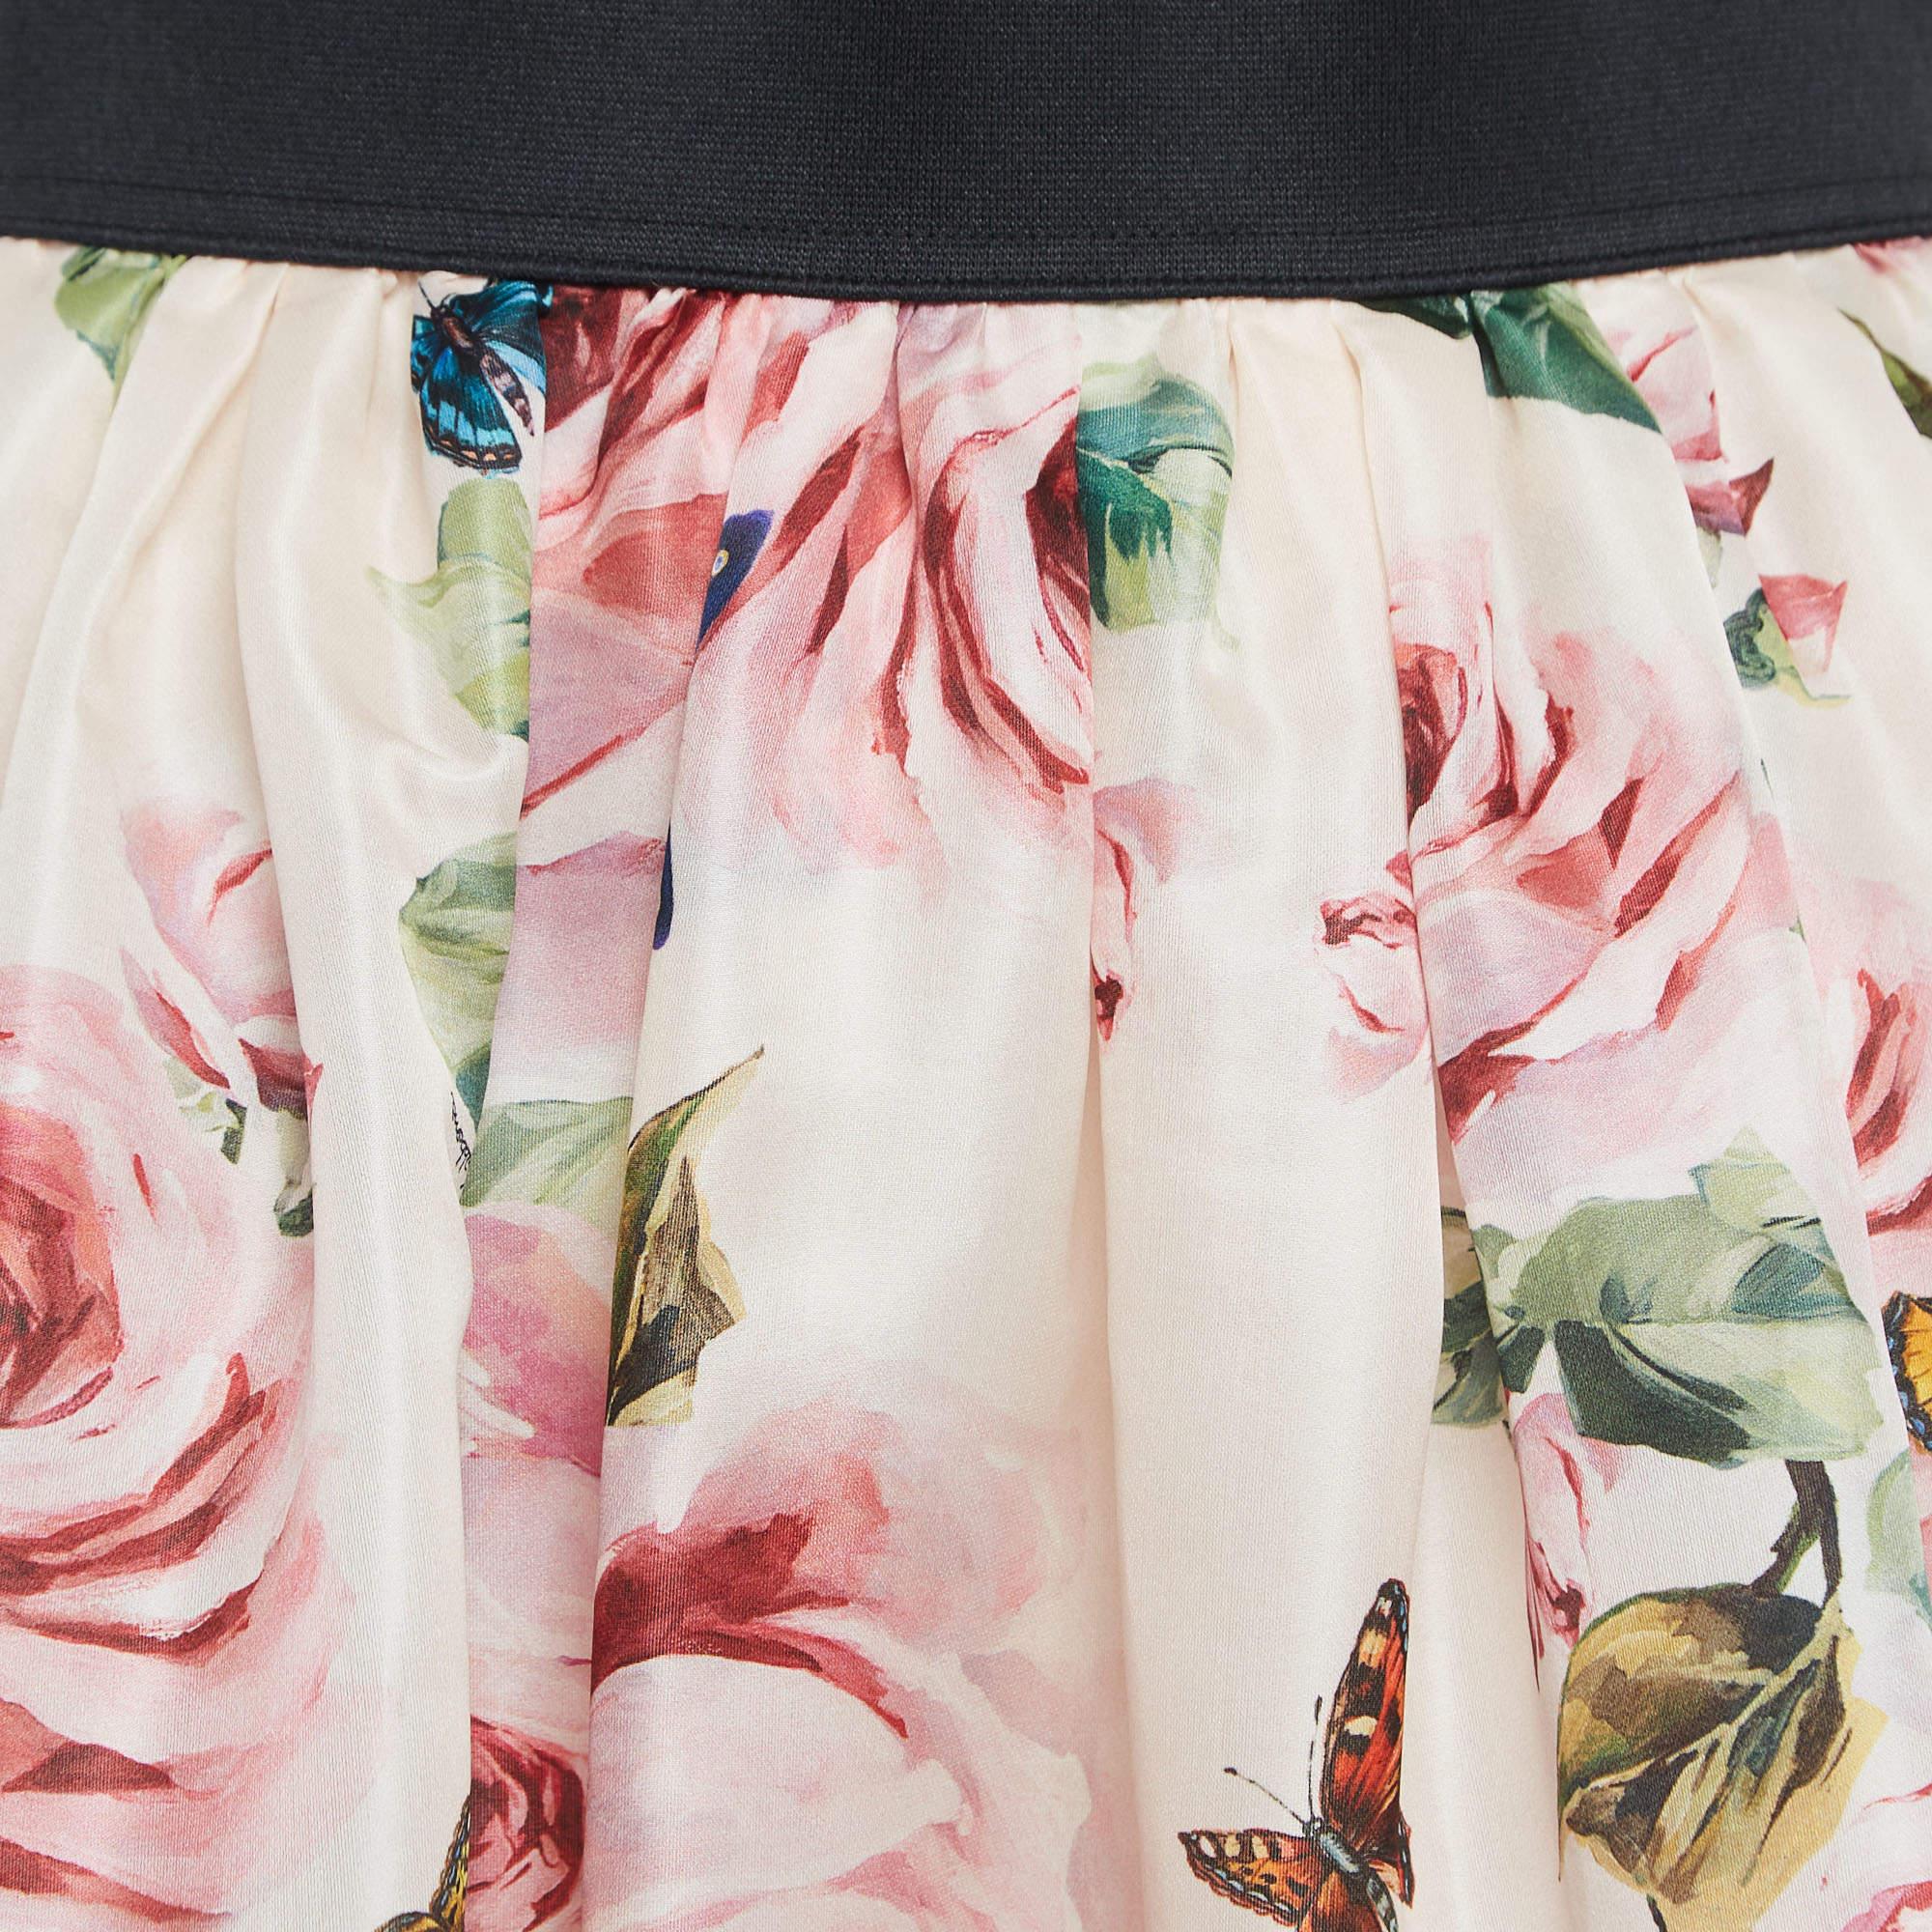 This elegant Dolce & Gabbana floral skirt is worth adding to your closet! Crafted from fine materials, it is exquisitely designed into a flattering shape.

